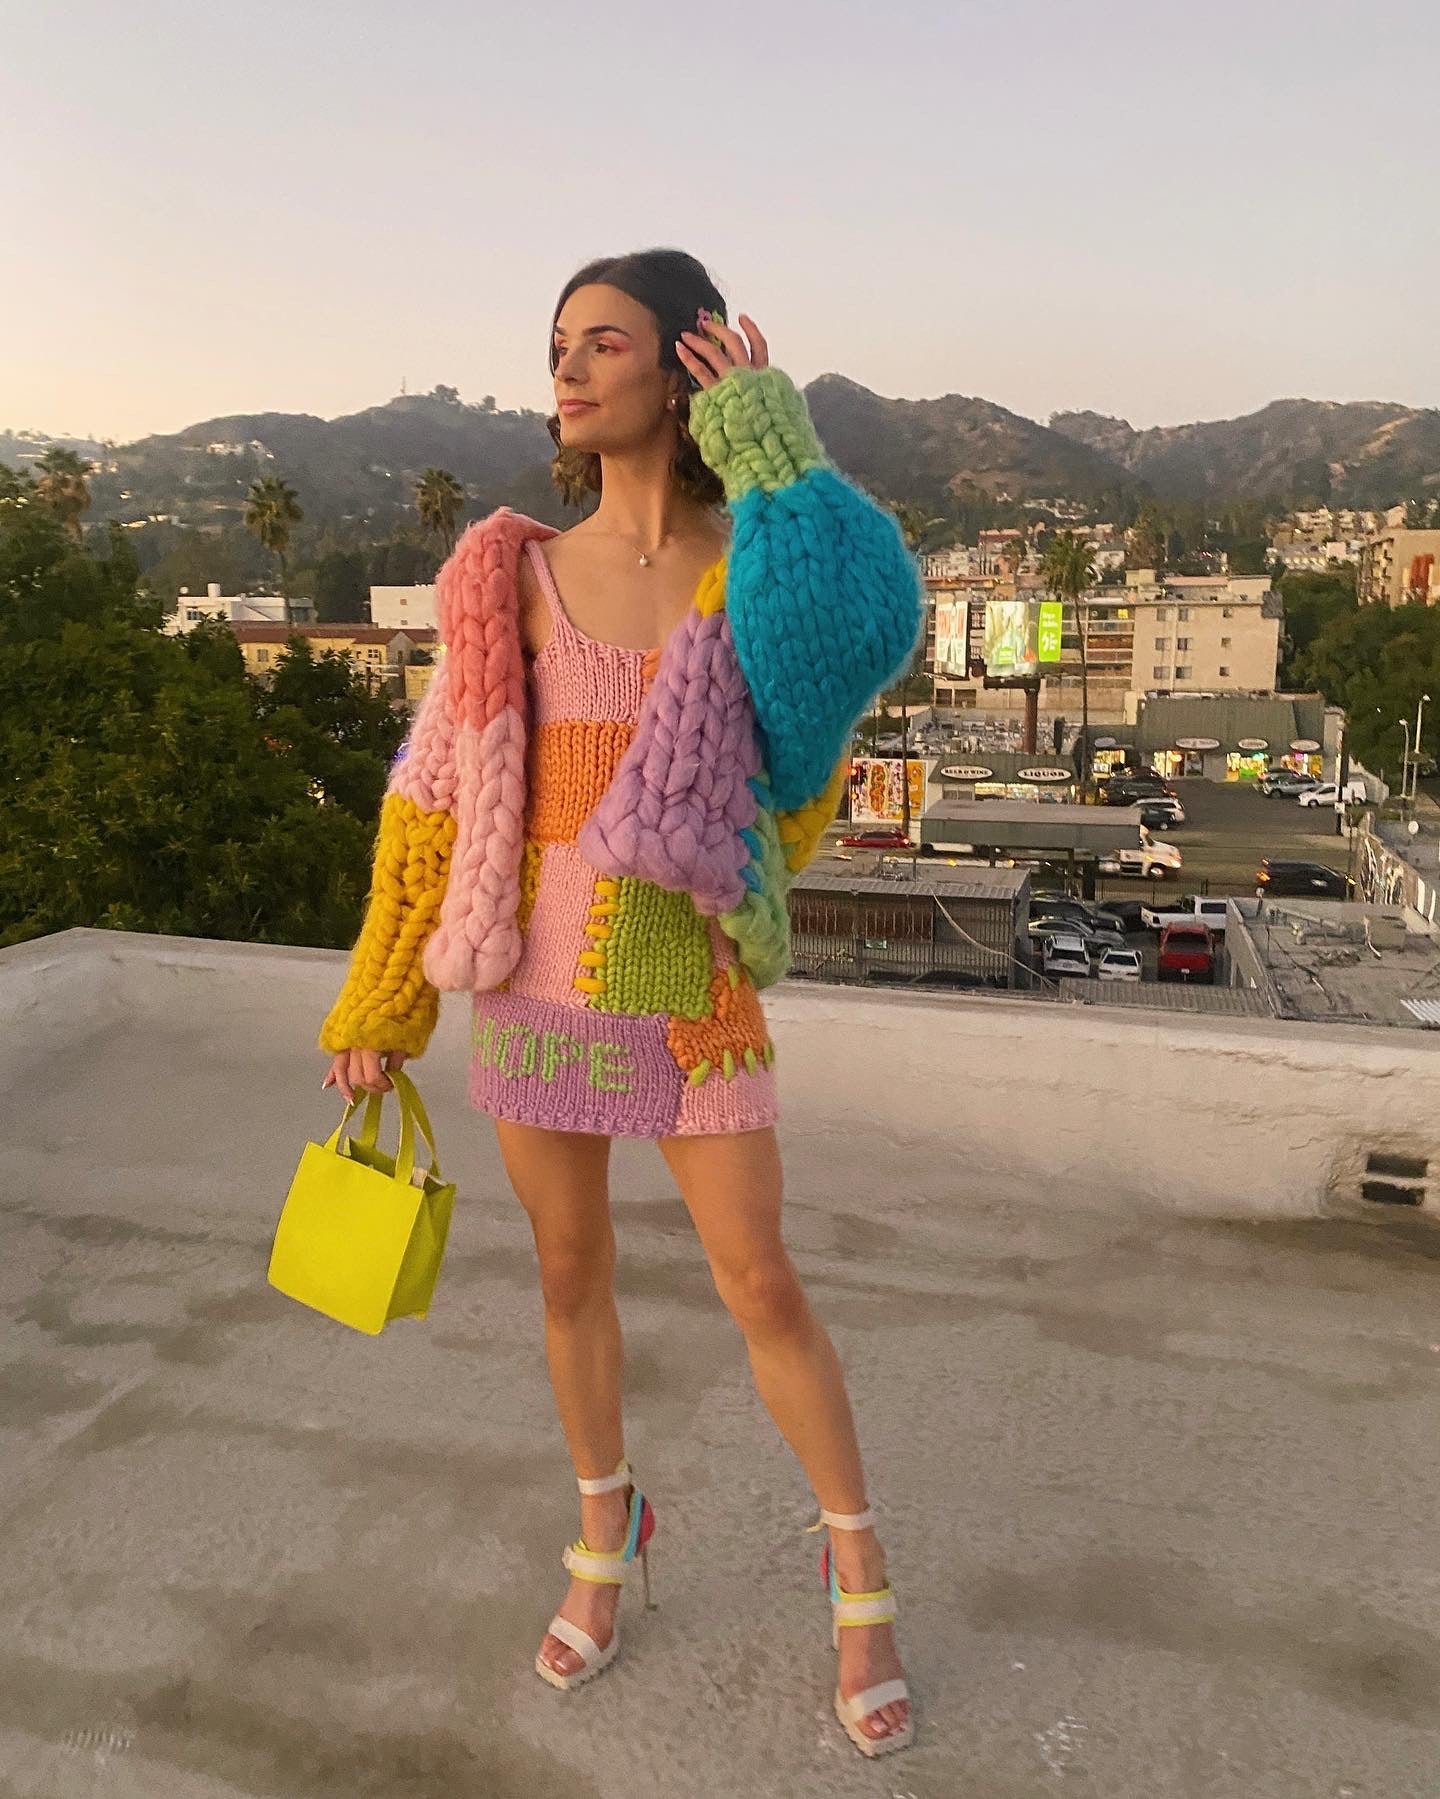 Dylan Mulvaney in a colorful dress